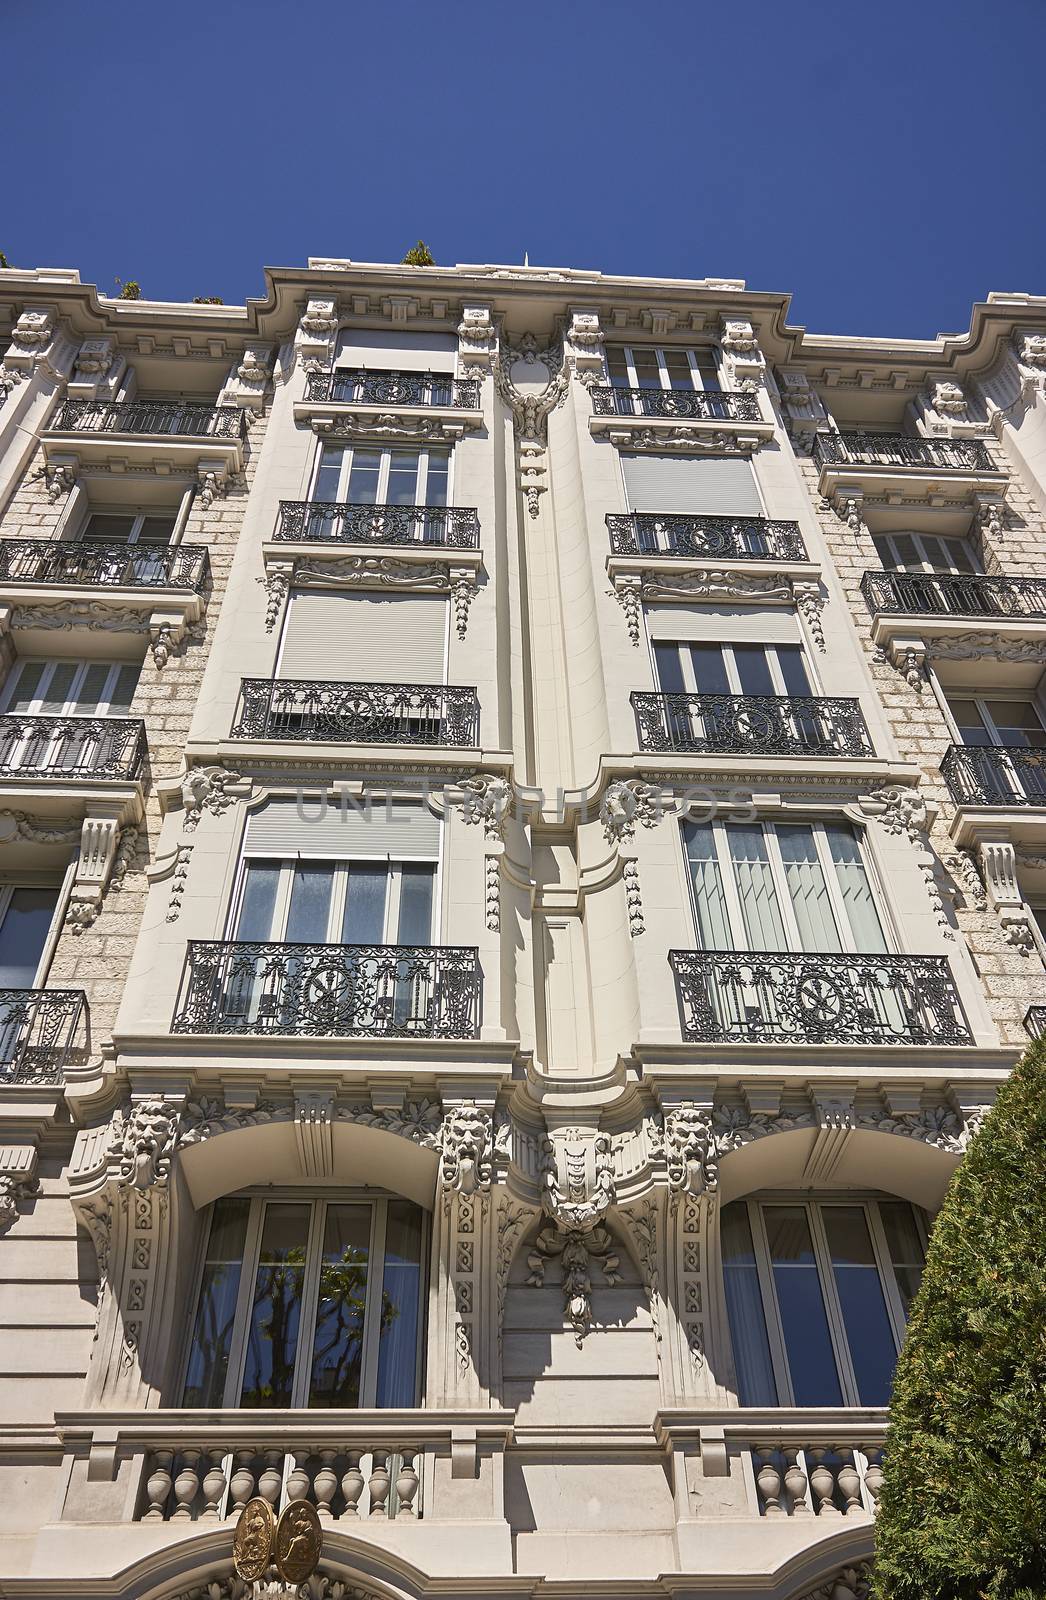 example of a baroque-style building on the nicely decorated three-story windows and balconies with numerous decorations typical of this architectural style.